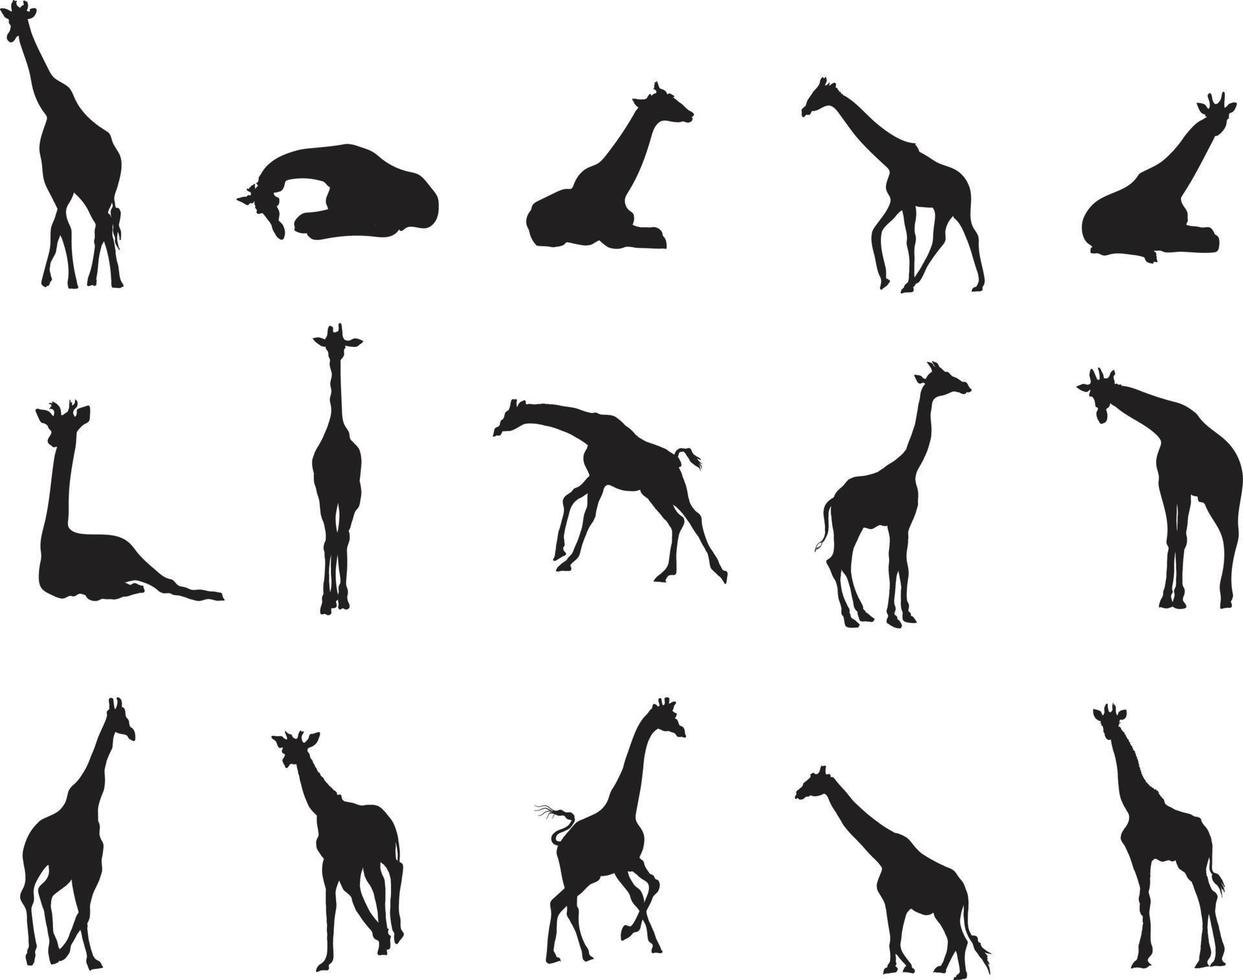 A vector silhouette collection of Giraffes for artwork compositions.